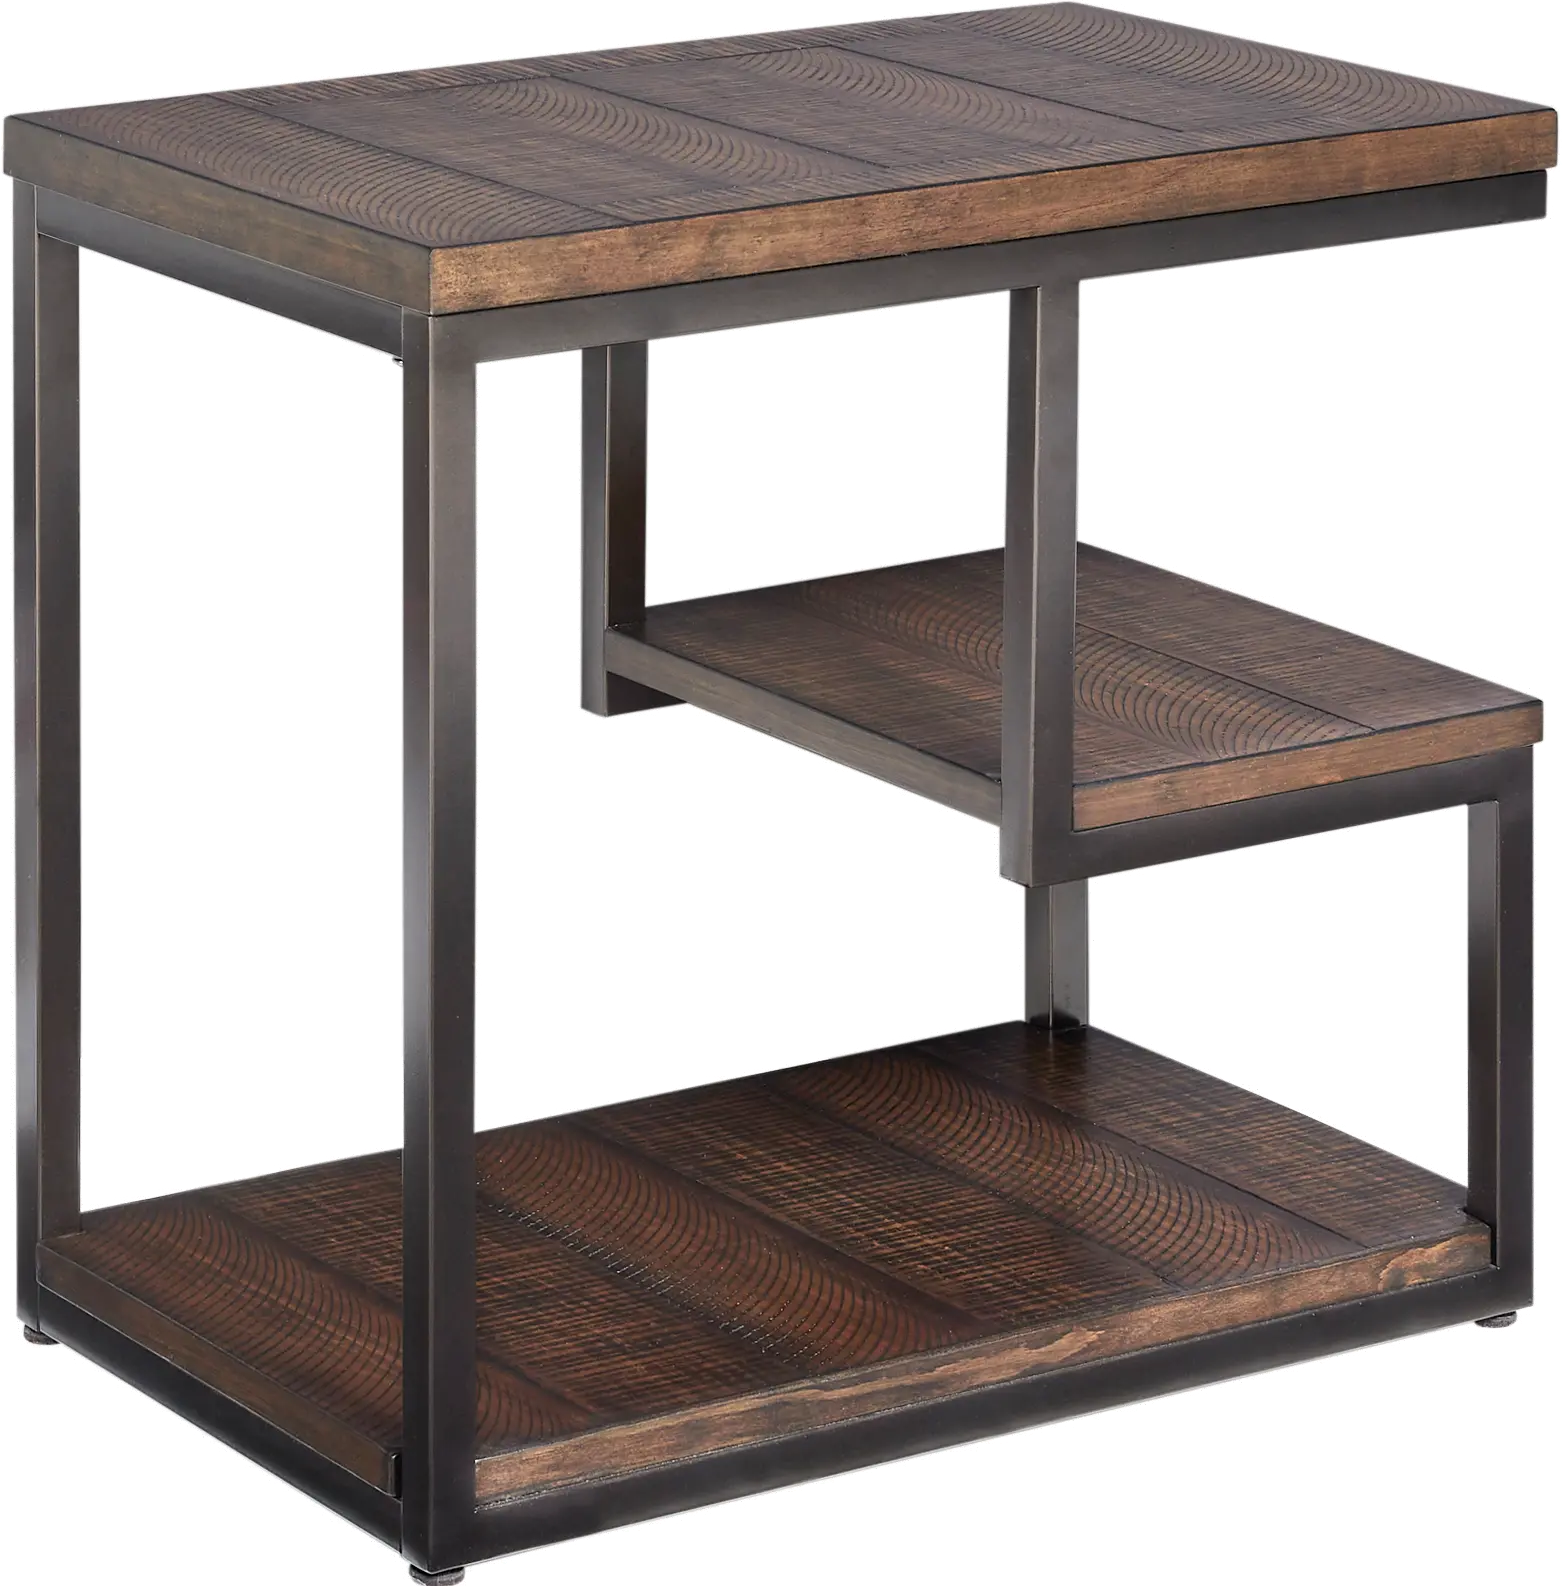 Photos - Dining Table Progressive Lake Forest Brown Chairside Table T365-29